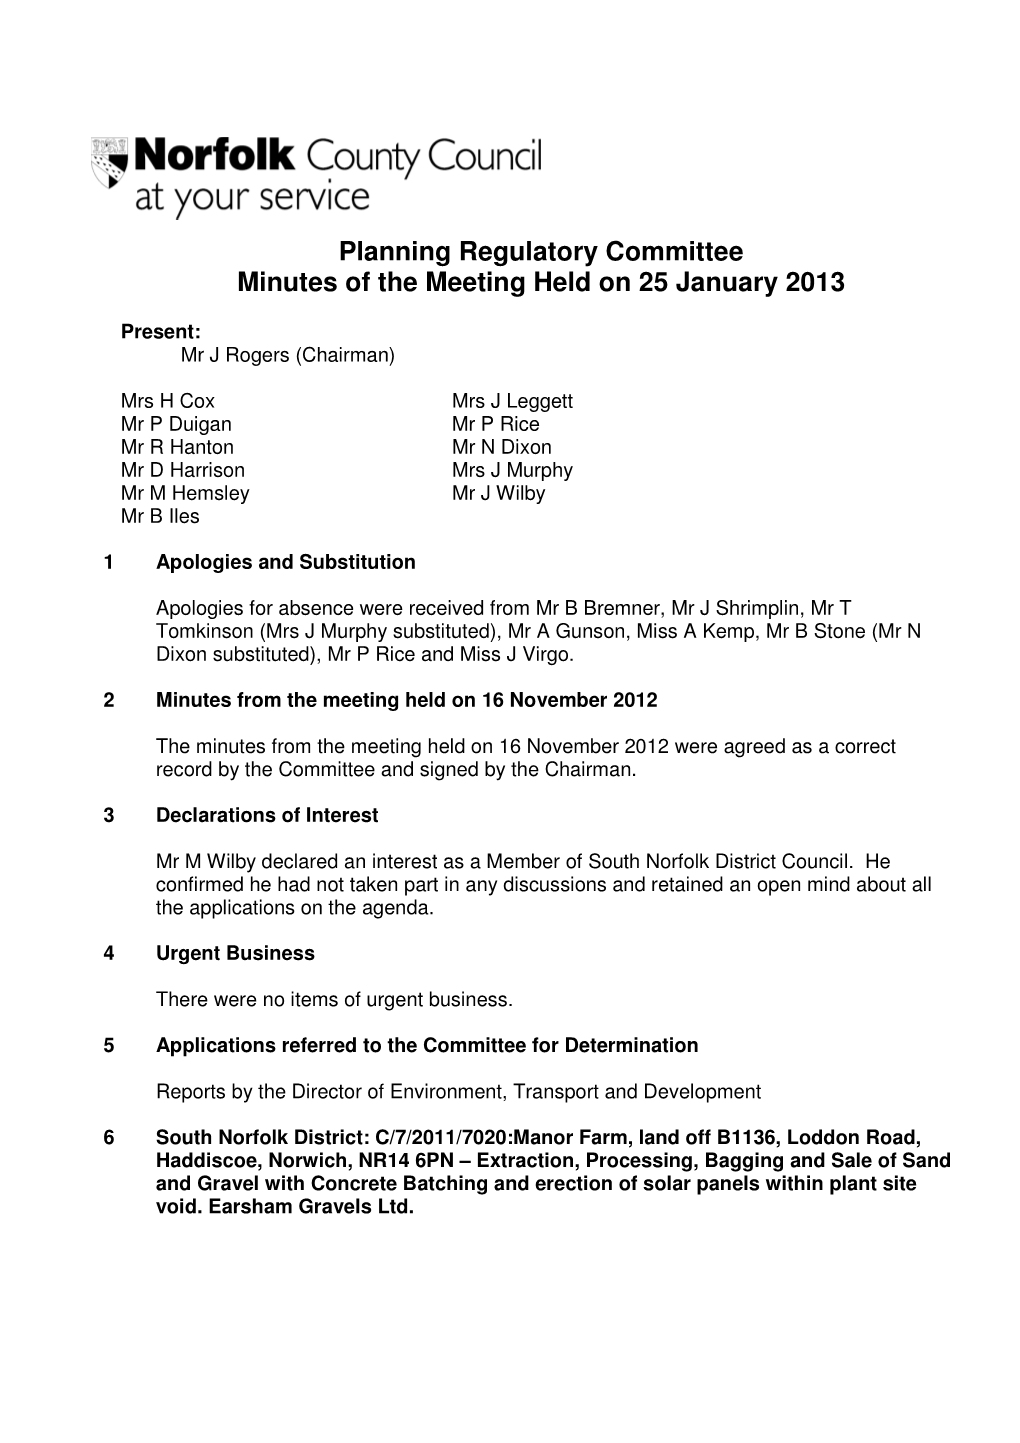 Planning (Regulatory) Committee, Had Tended His Apologies for the Meeting